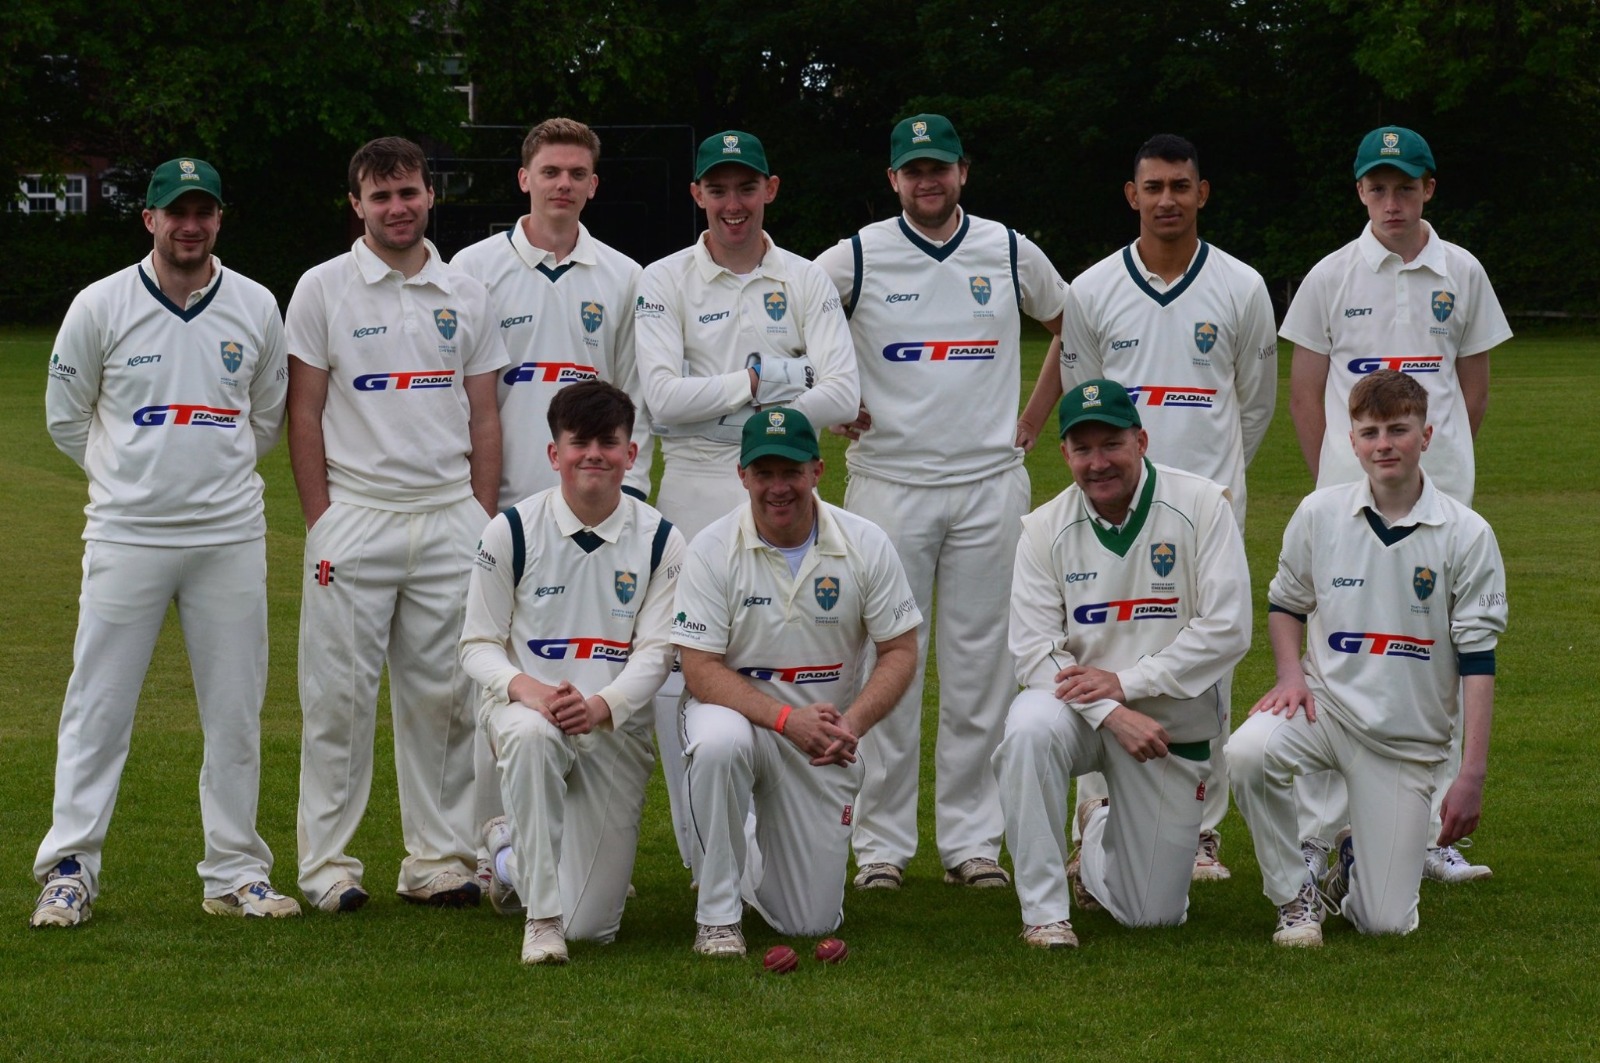 4thXI Crowned League Champions!